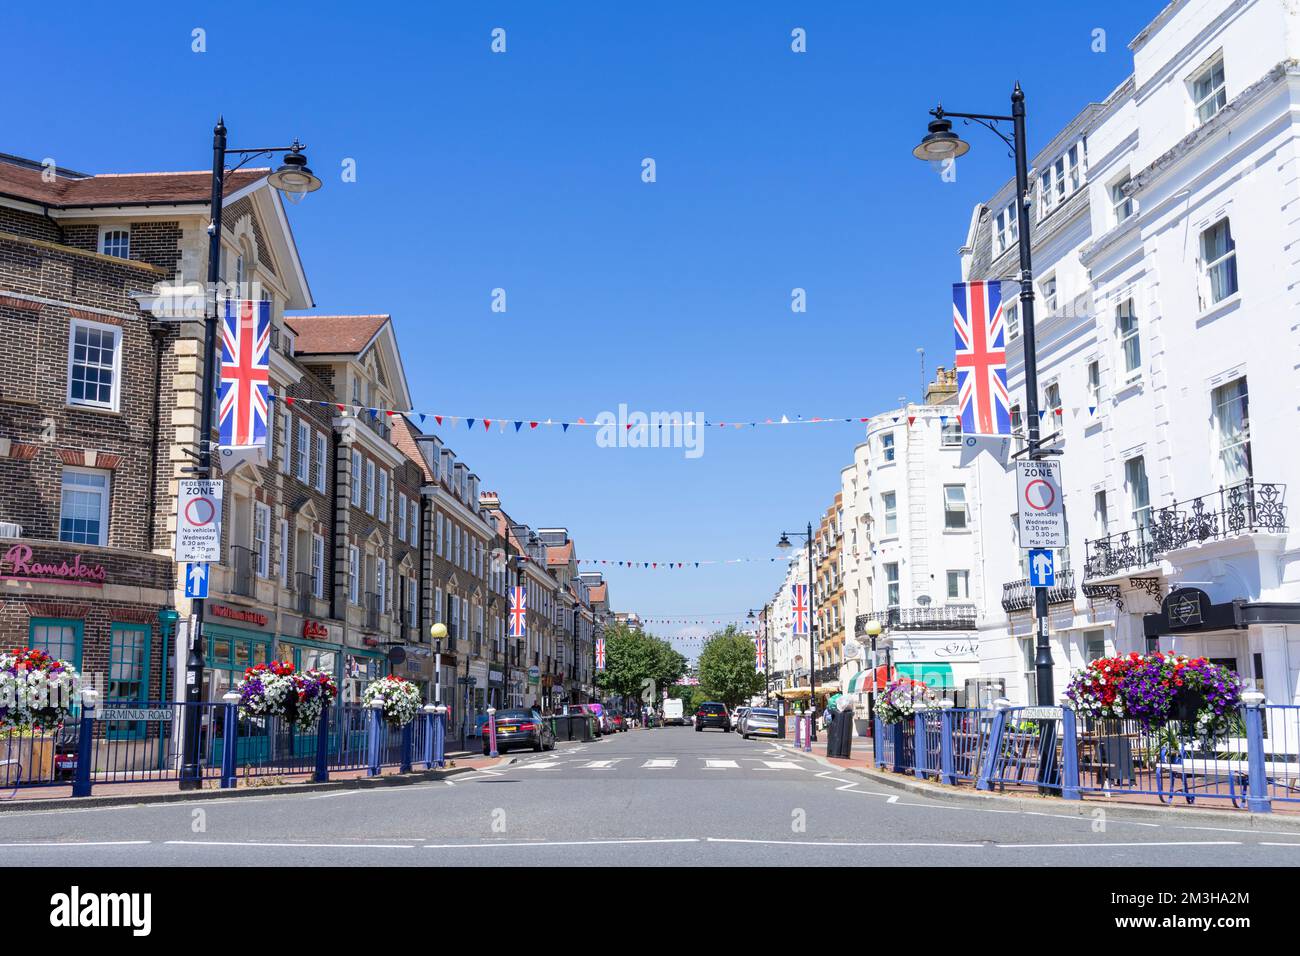 Eastbourne East Sussex Eastbourne Terminus road shops and restaurants with Union flags flying Eastbourne town centre Eastbourne  England UK GB Europe Stock Photo